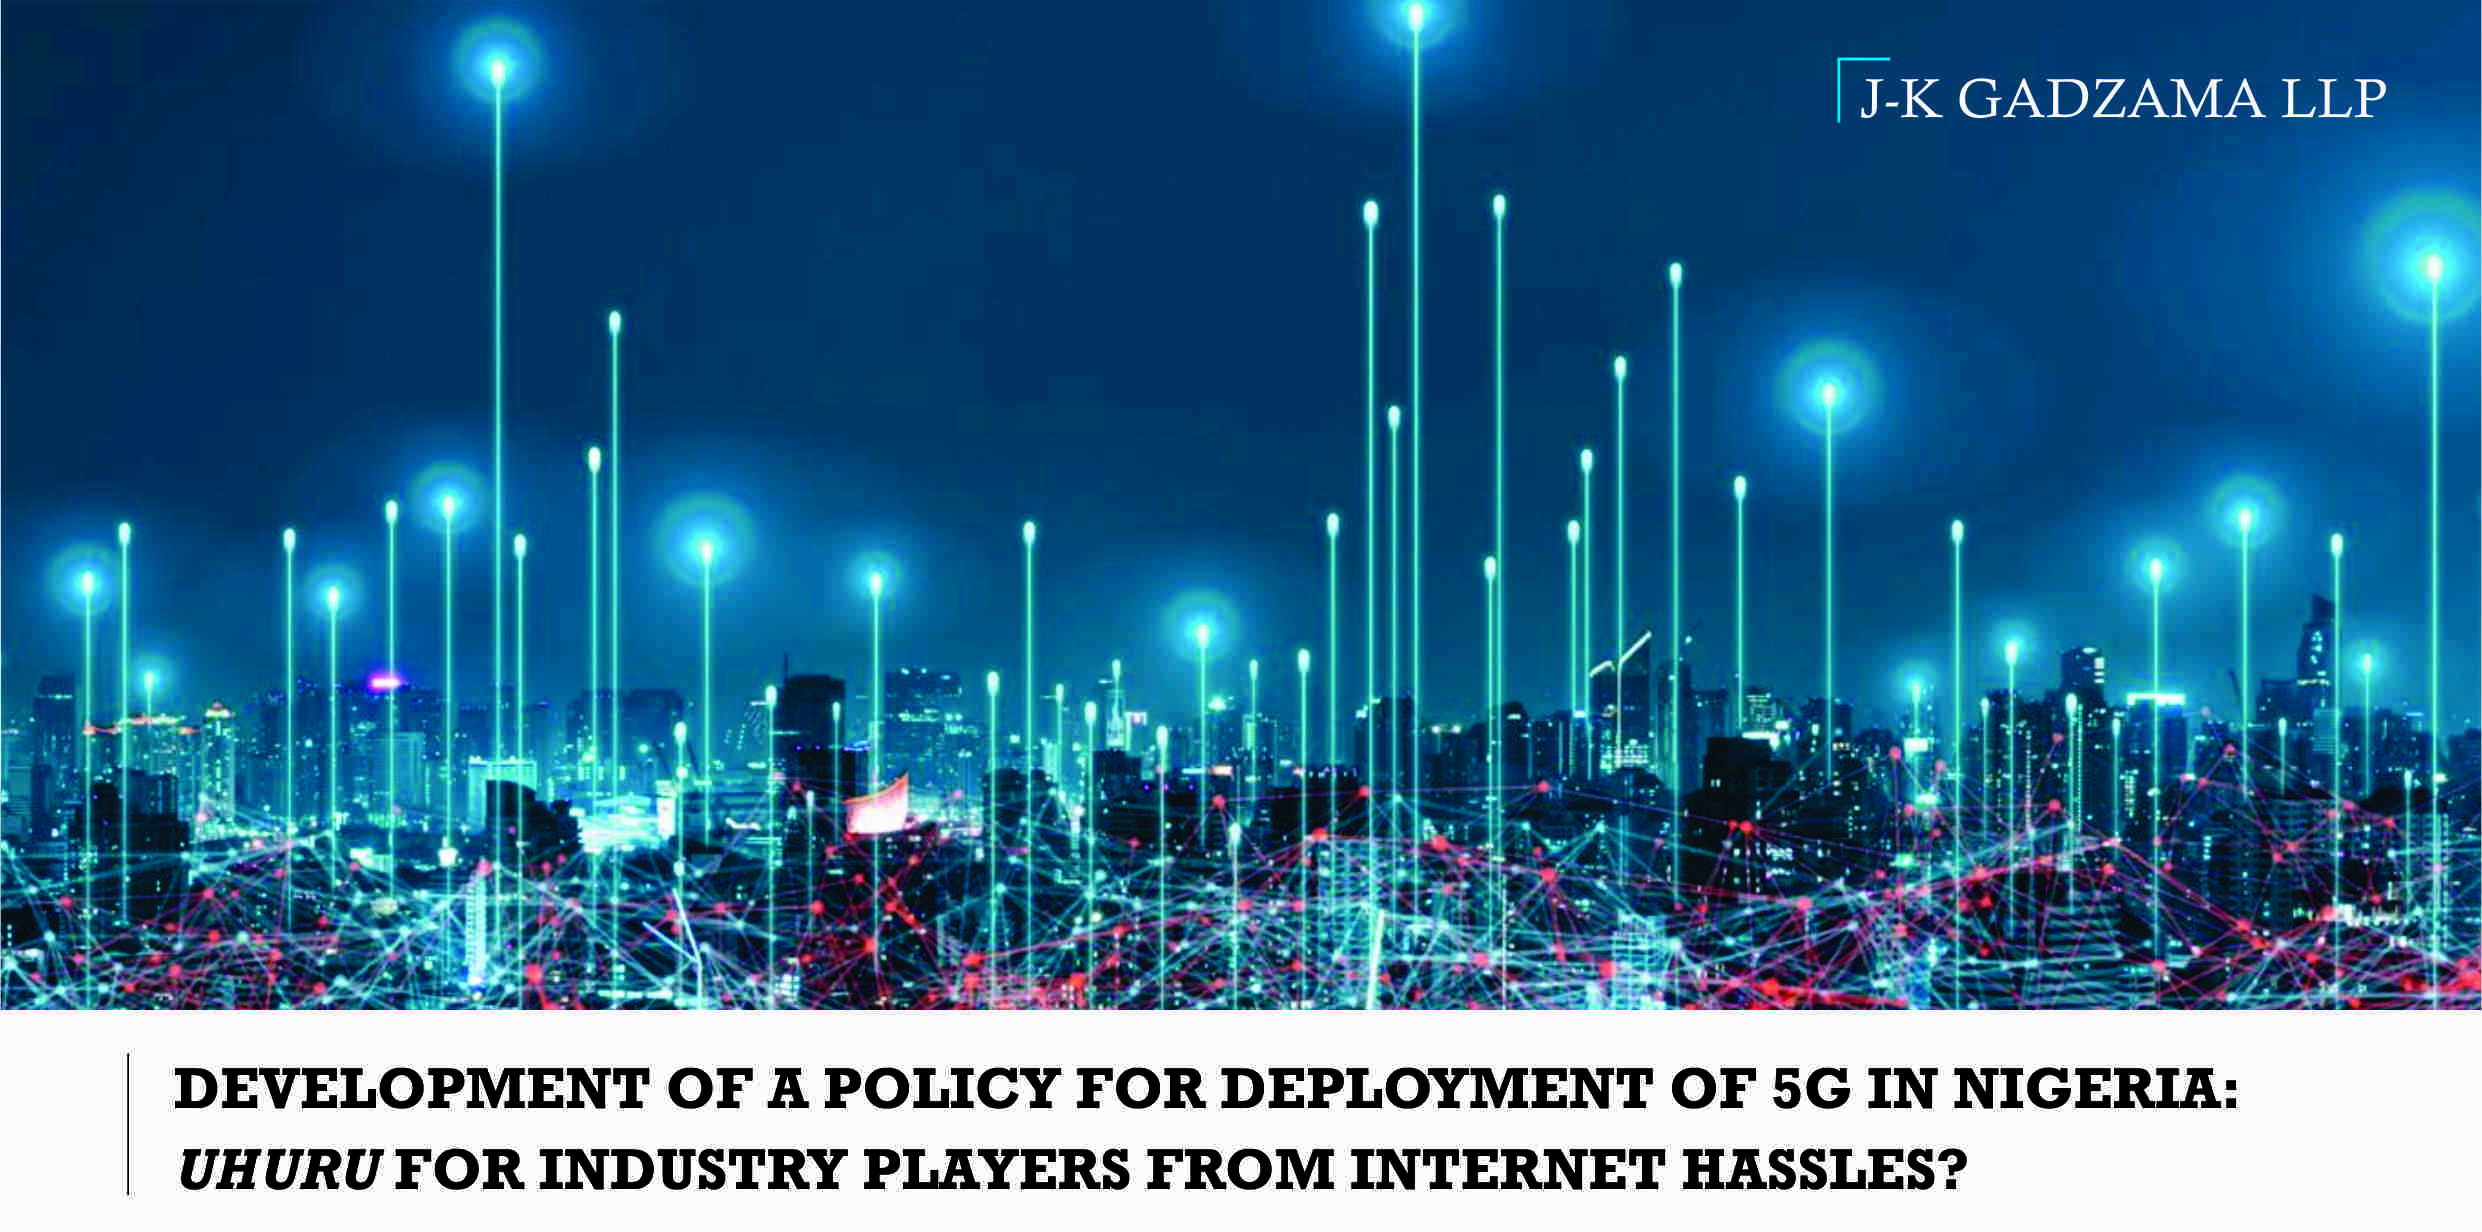 Development of a Policy for Deployment of 5G in Nigeria: UHURU for Industry Players from Internet Hassles?